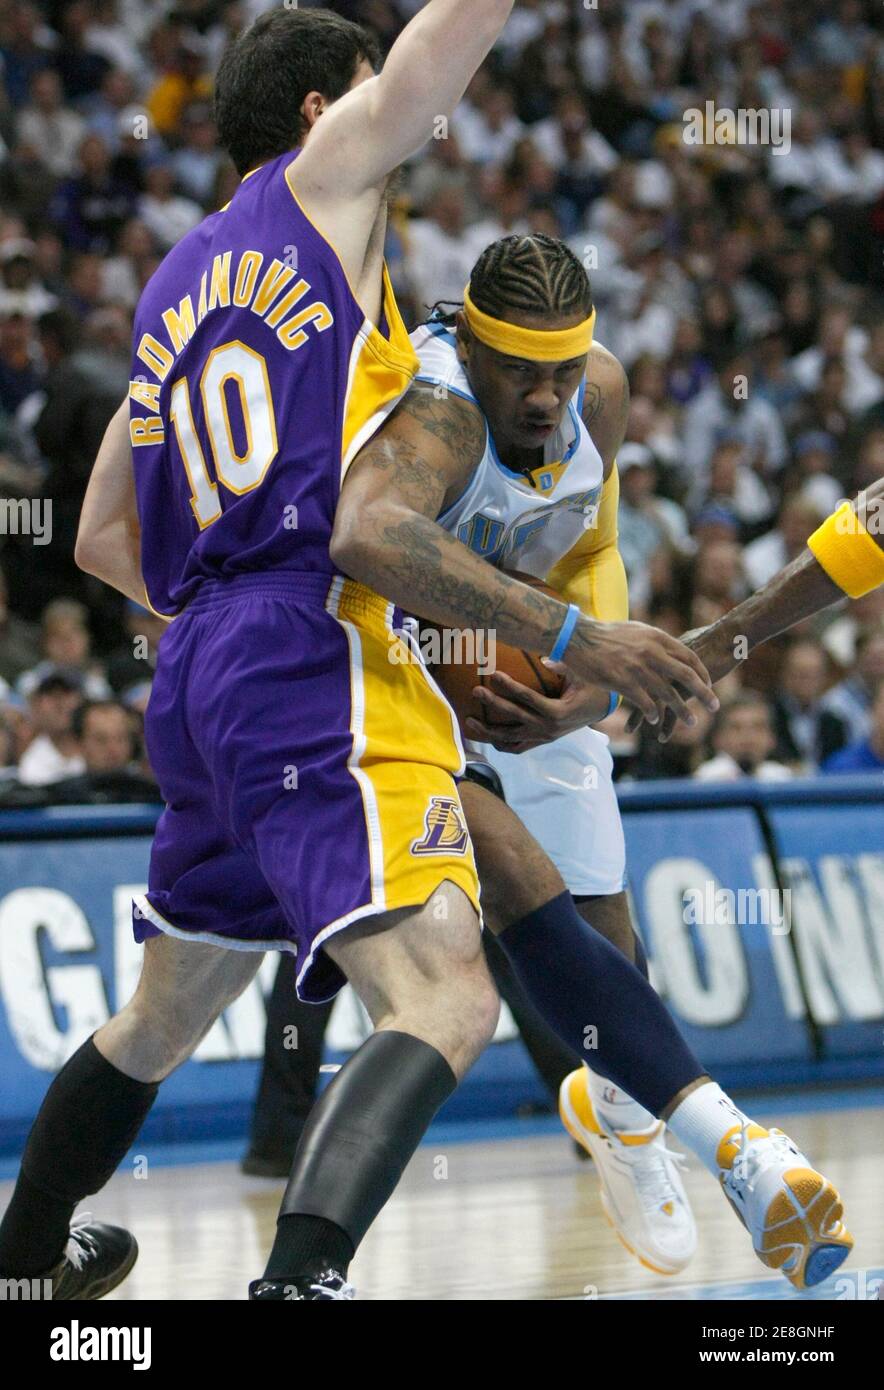 Denver Nuggets Carmelo Anthony (R) drives past Los Angeles Lakers Vladmir Radmanovic during the first quarter of Game 3 of their NBA playoff series in Denver, Colorado, April 26, 2008. REUTERS/Rick Wilking (UNITED STATES) Stock Photo